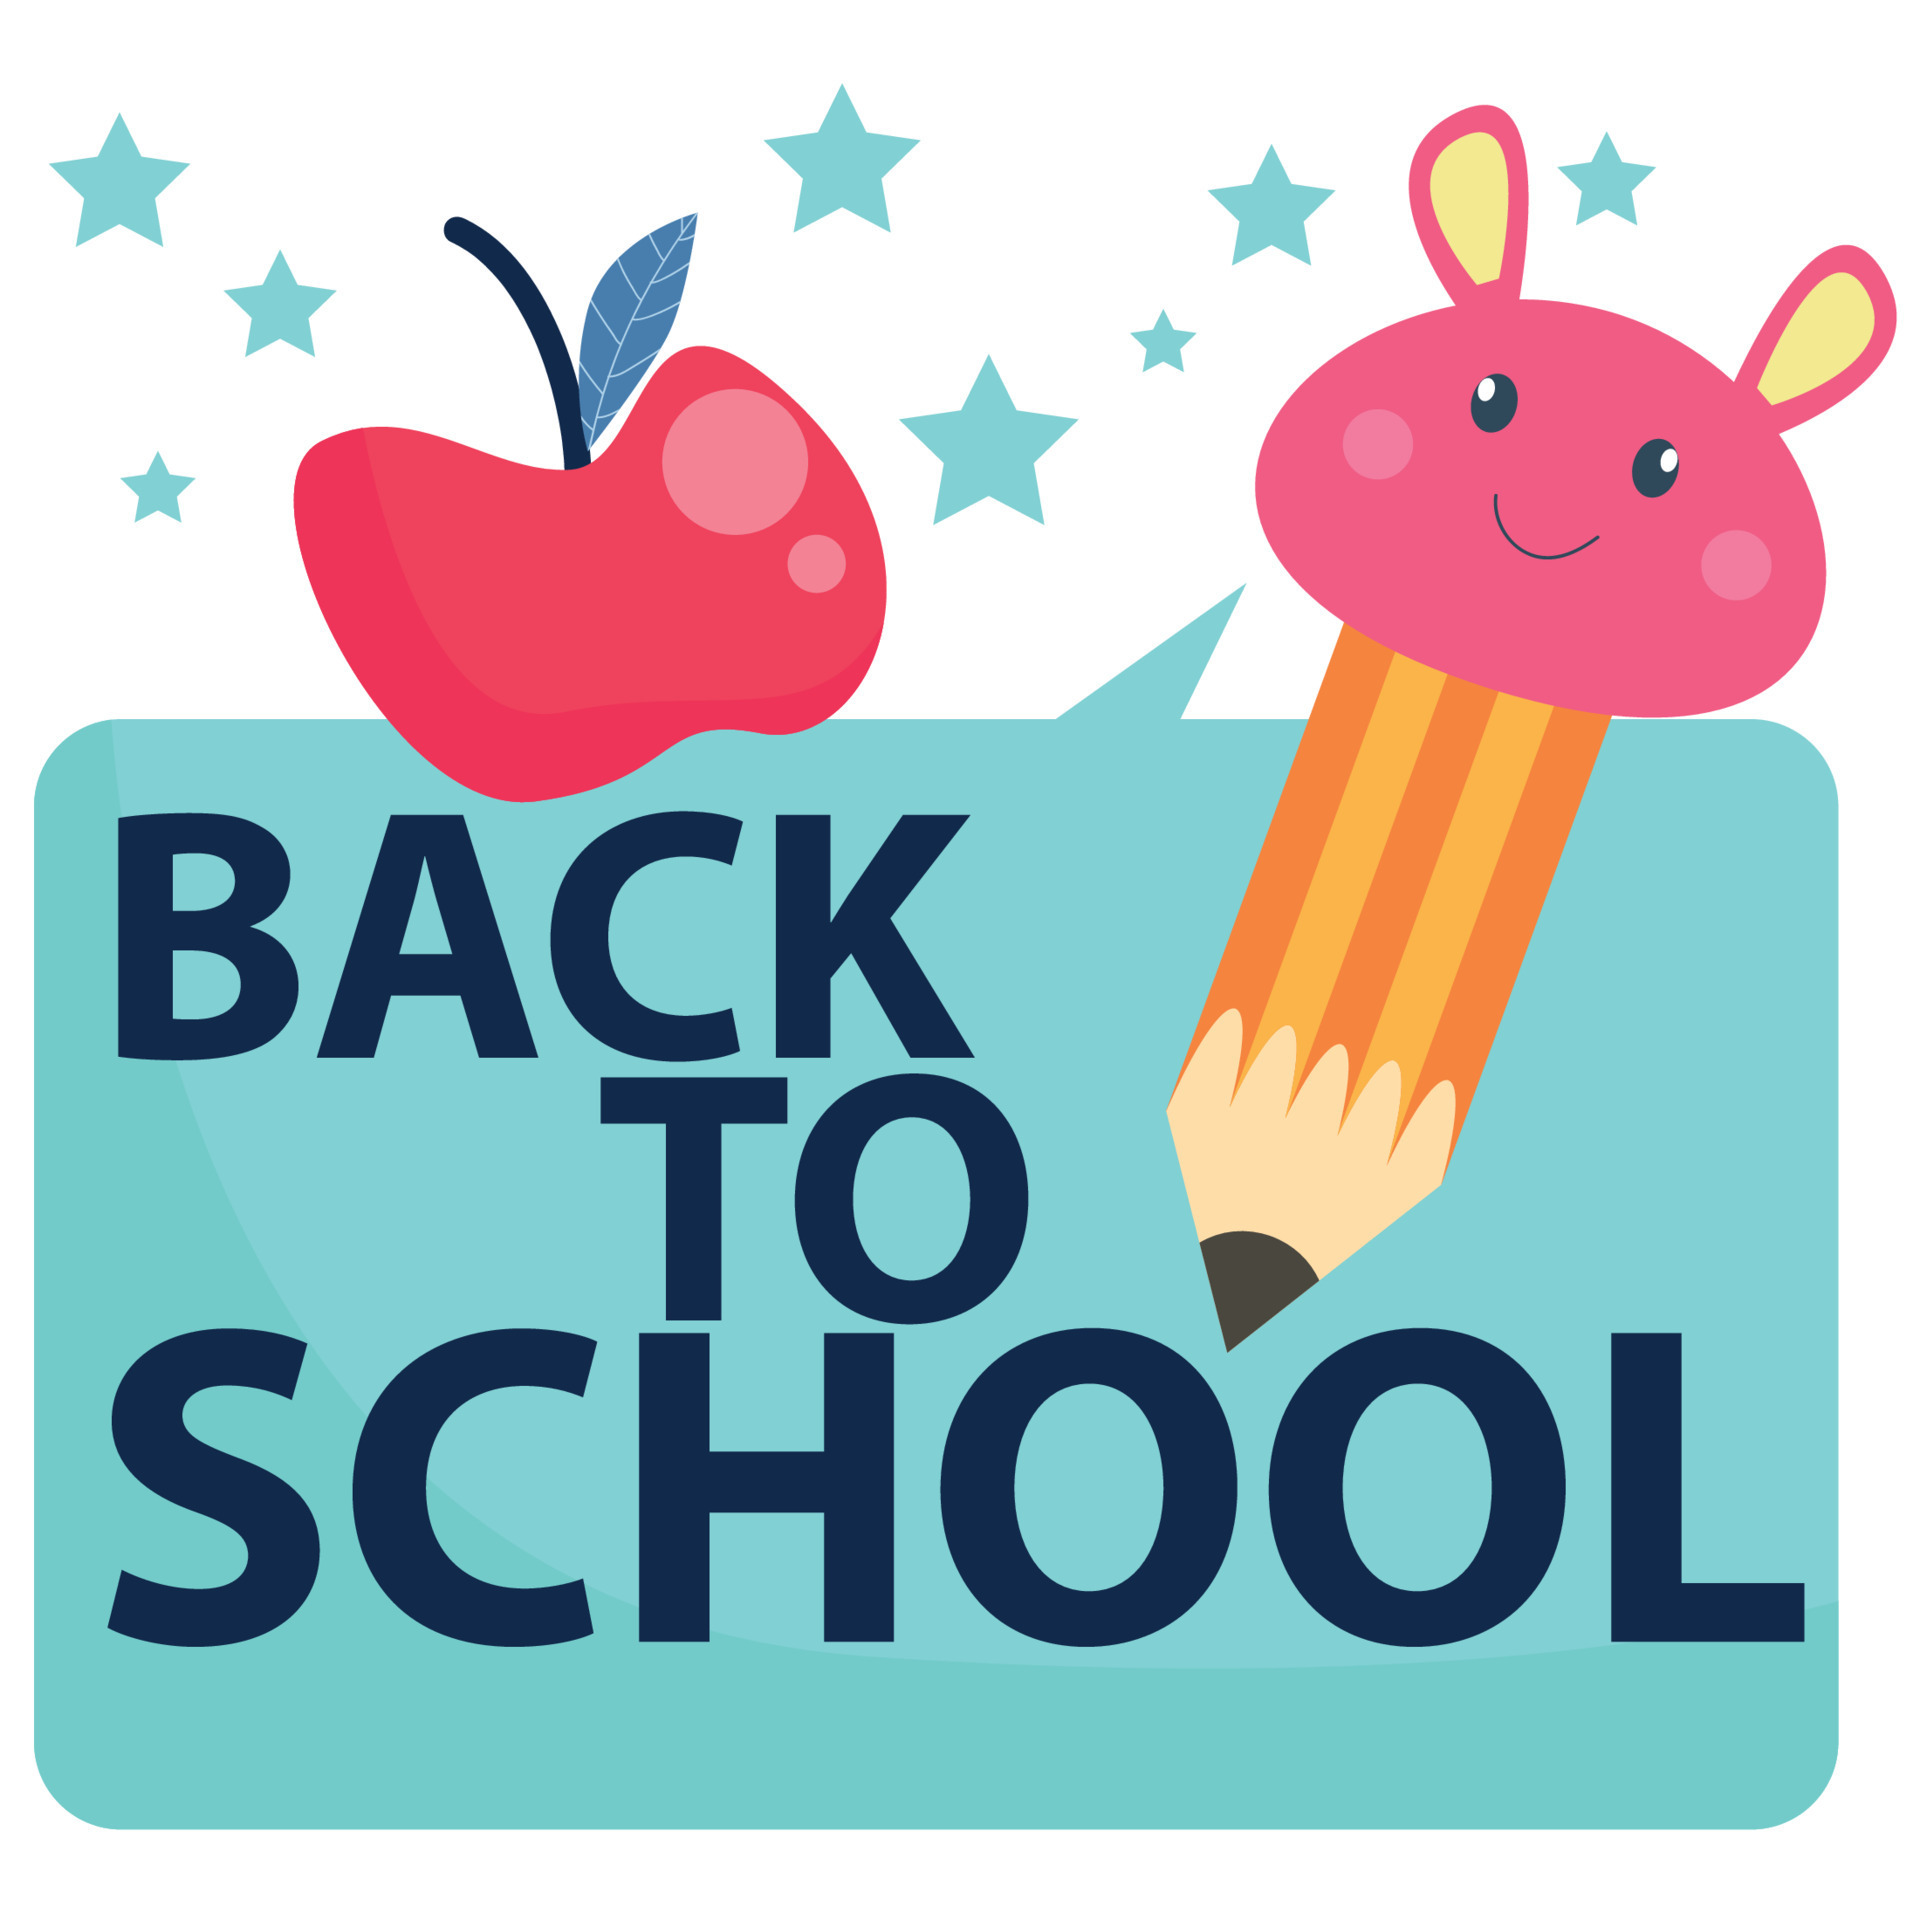 welcome-back-to-school-poster-back-to-school-greeting-poster-with